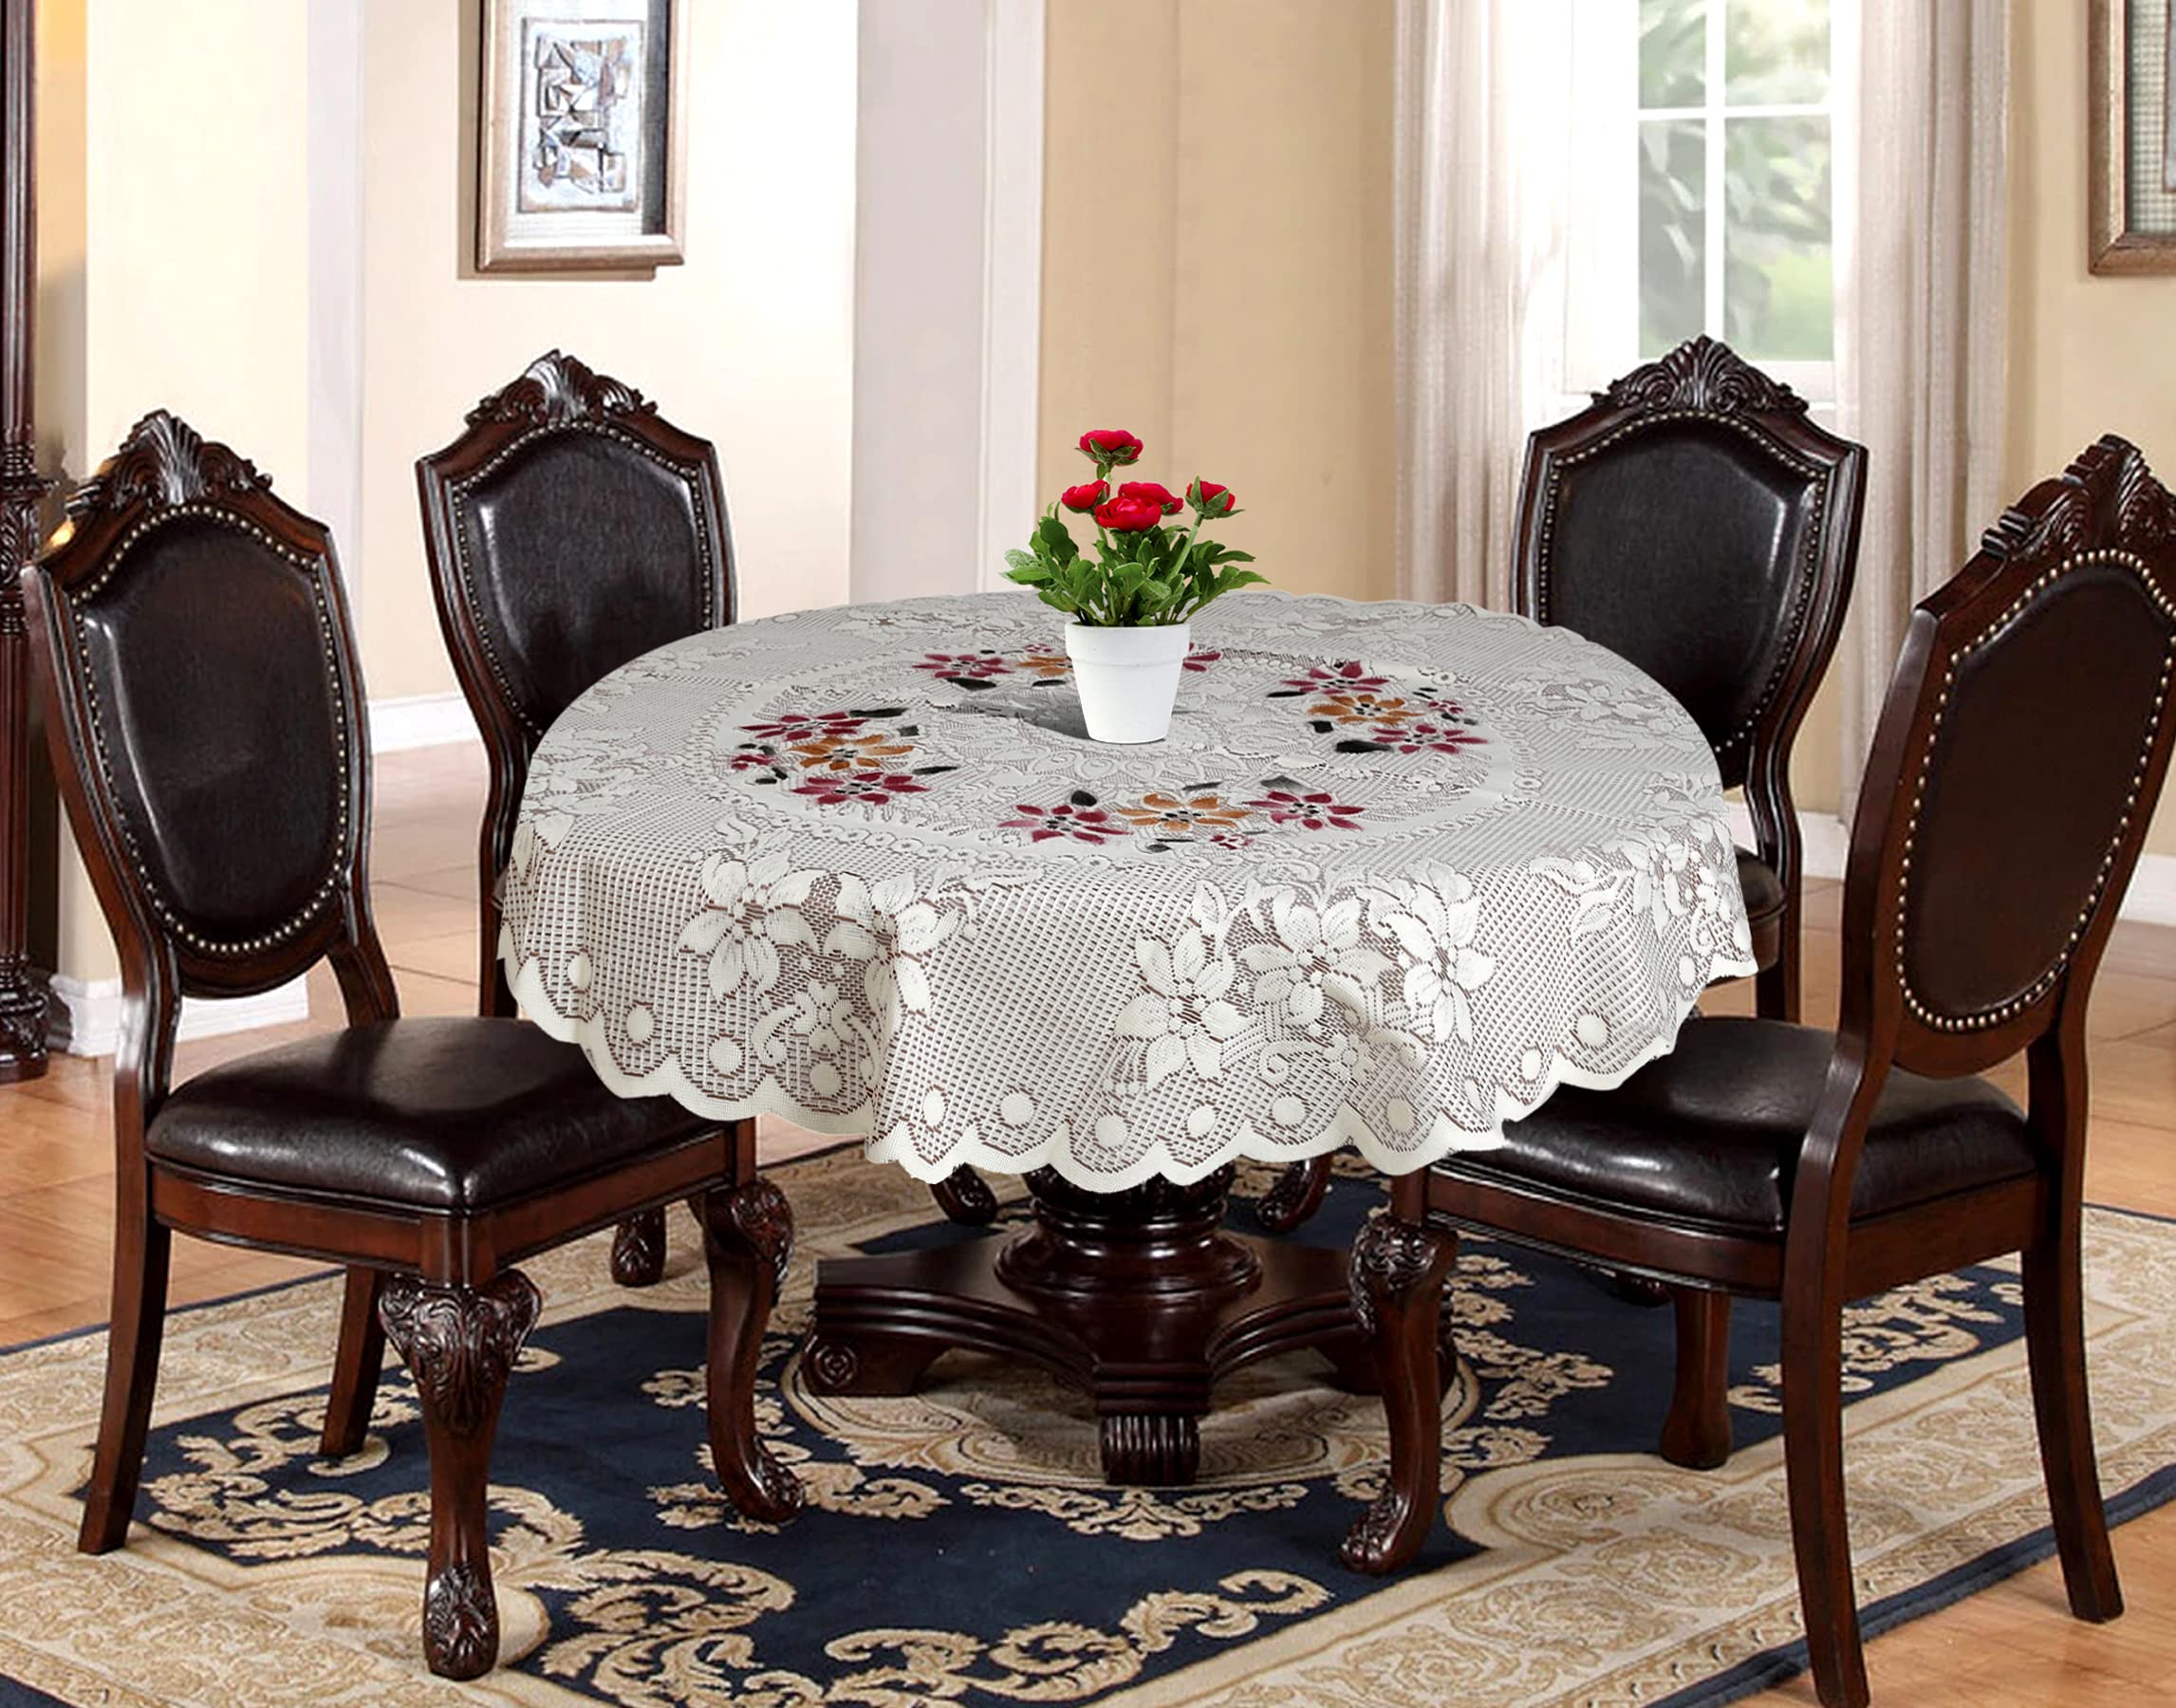 Kuber Industries Flower Design Round Table Cover for Kitchen Dining Room Restaurant Party Decoration (Brown), Standard (HS_37_KUBMART020506)